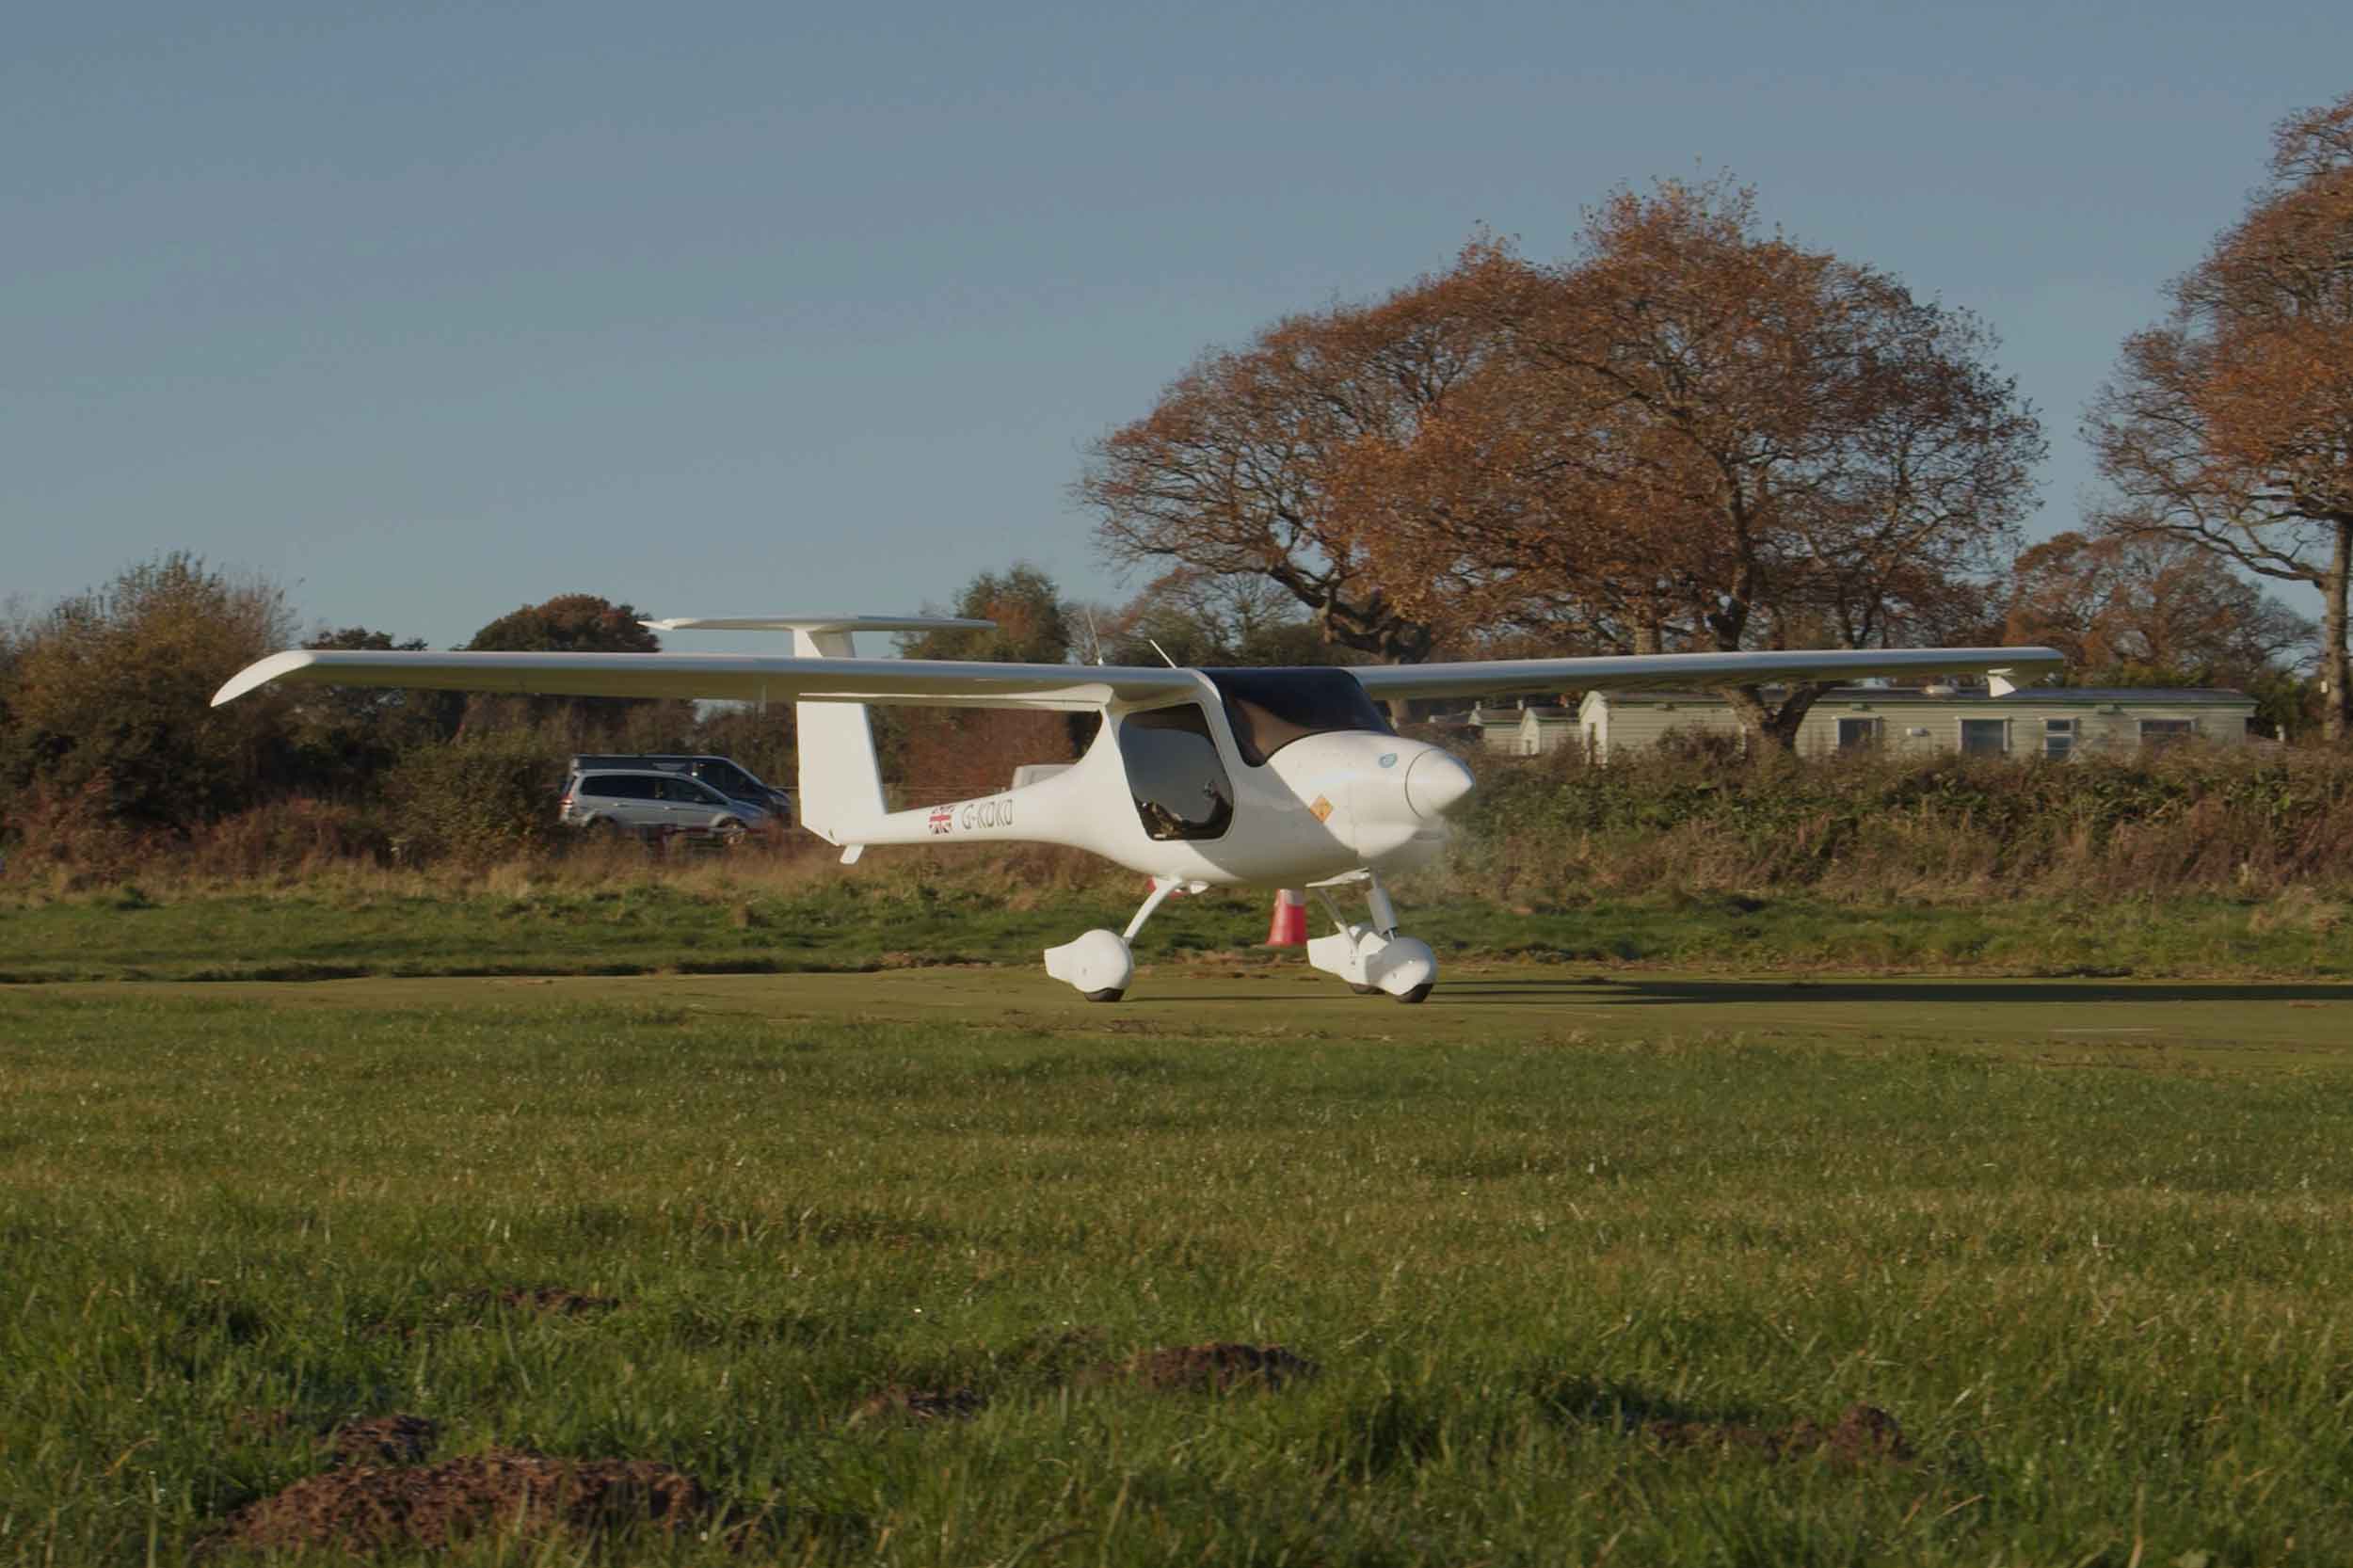 A recent flight from Sandown, where the Pipistrel was charged, to Shoreham, where it was topped up, tested the payment system